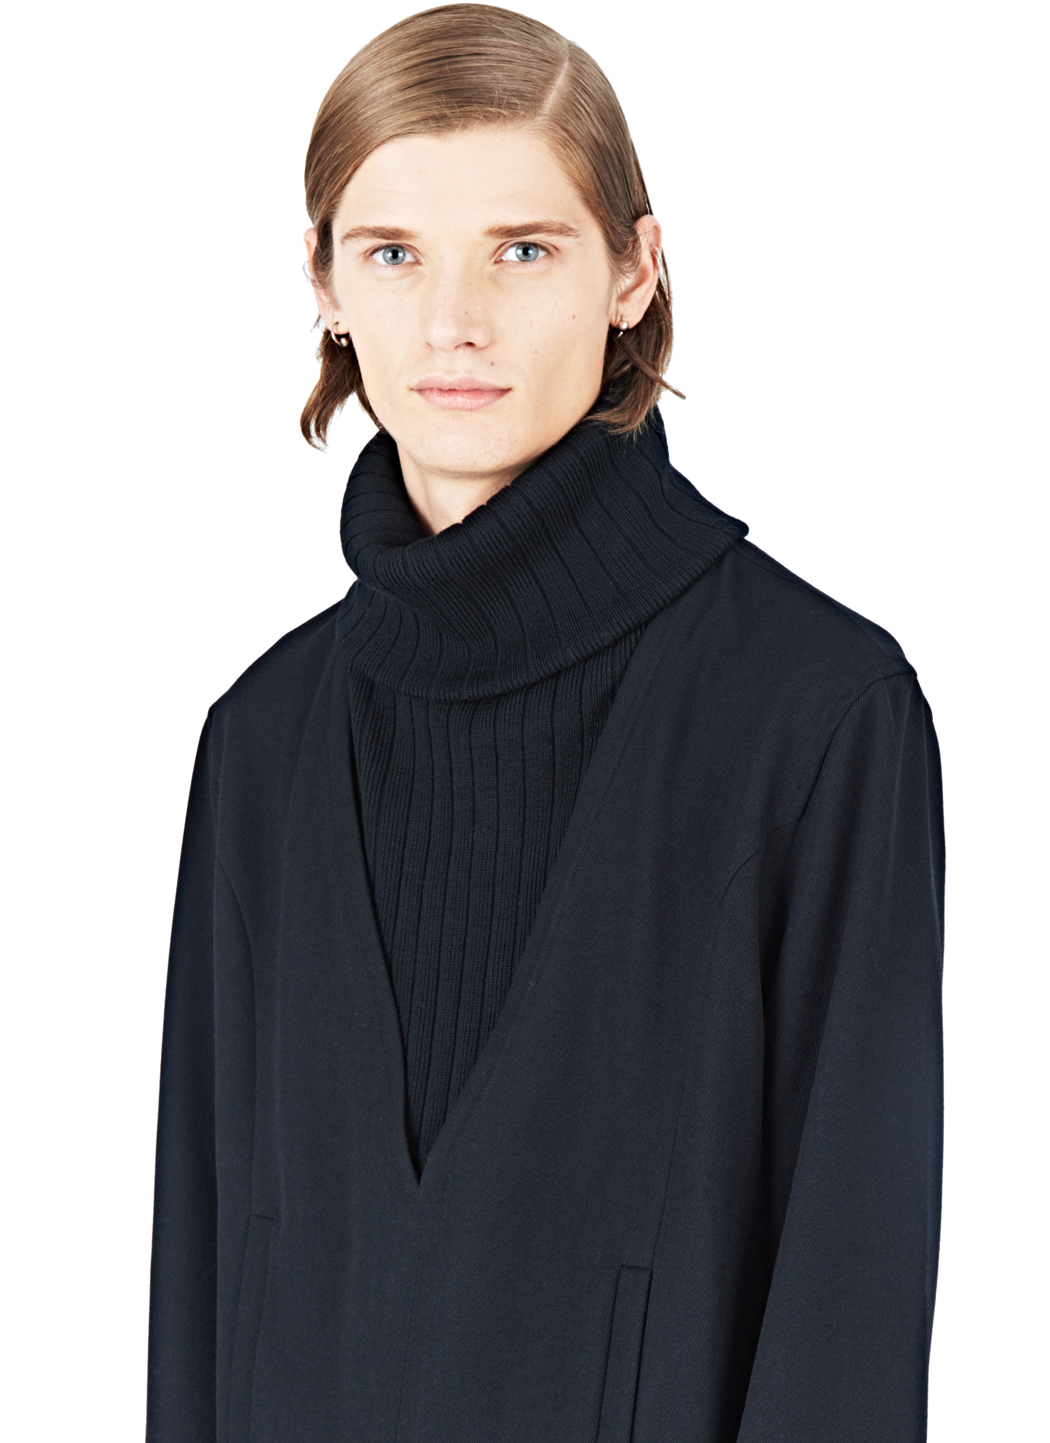 Lyst - J.W.Anderson Ribbed Roll Neck Sweater in Black for Men